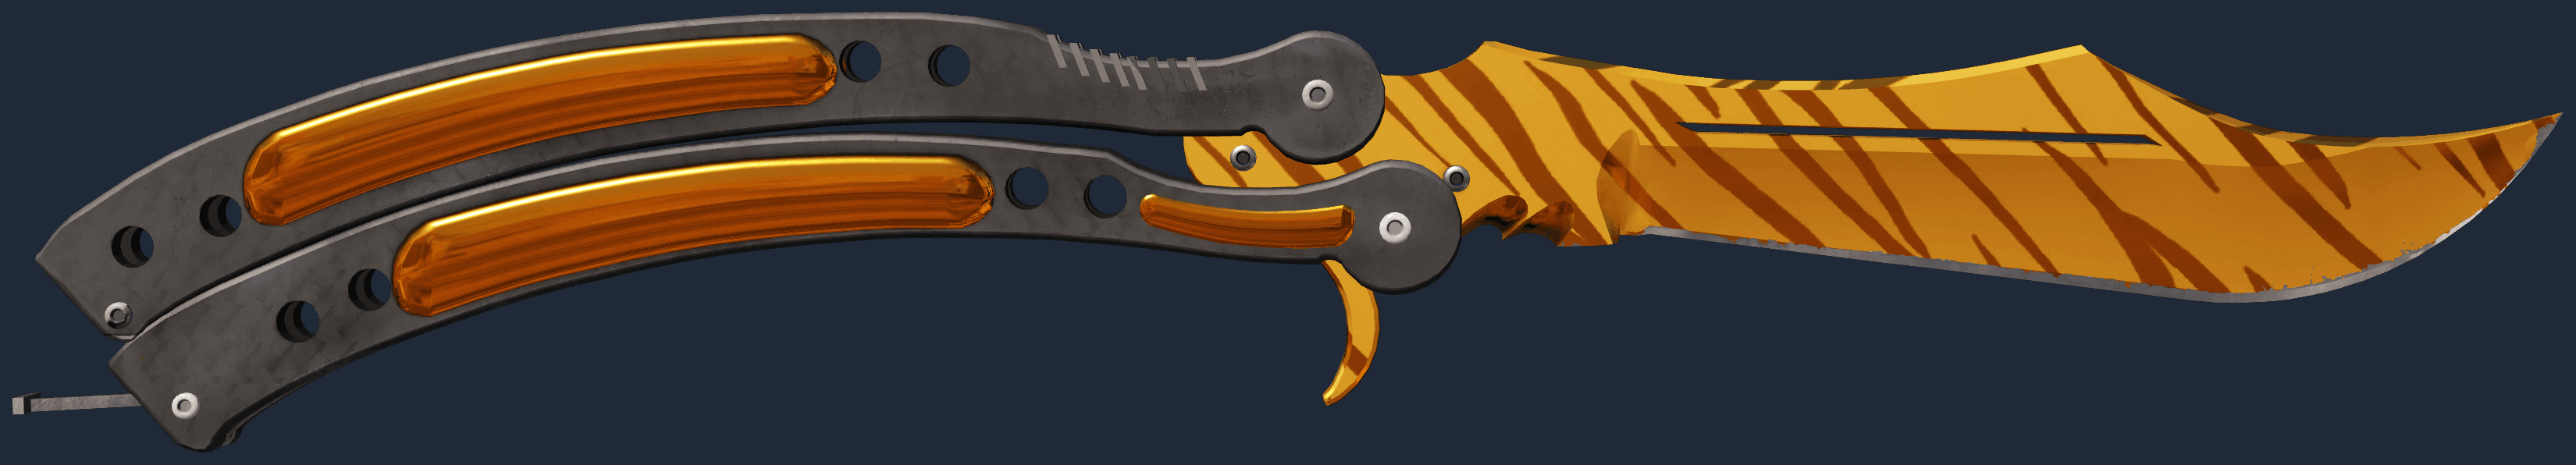 ★ Butterfly Knife | Tiger Tooth Screenshot